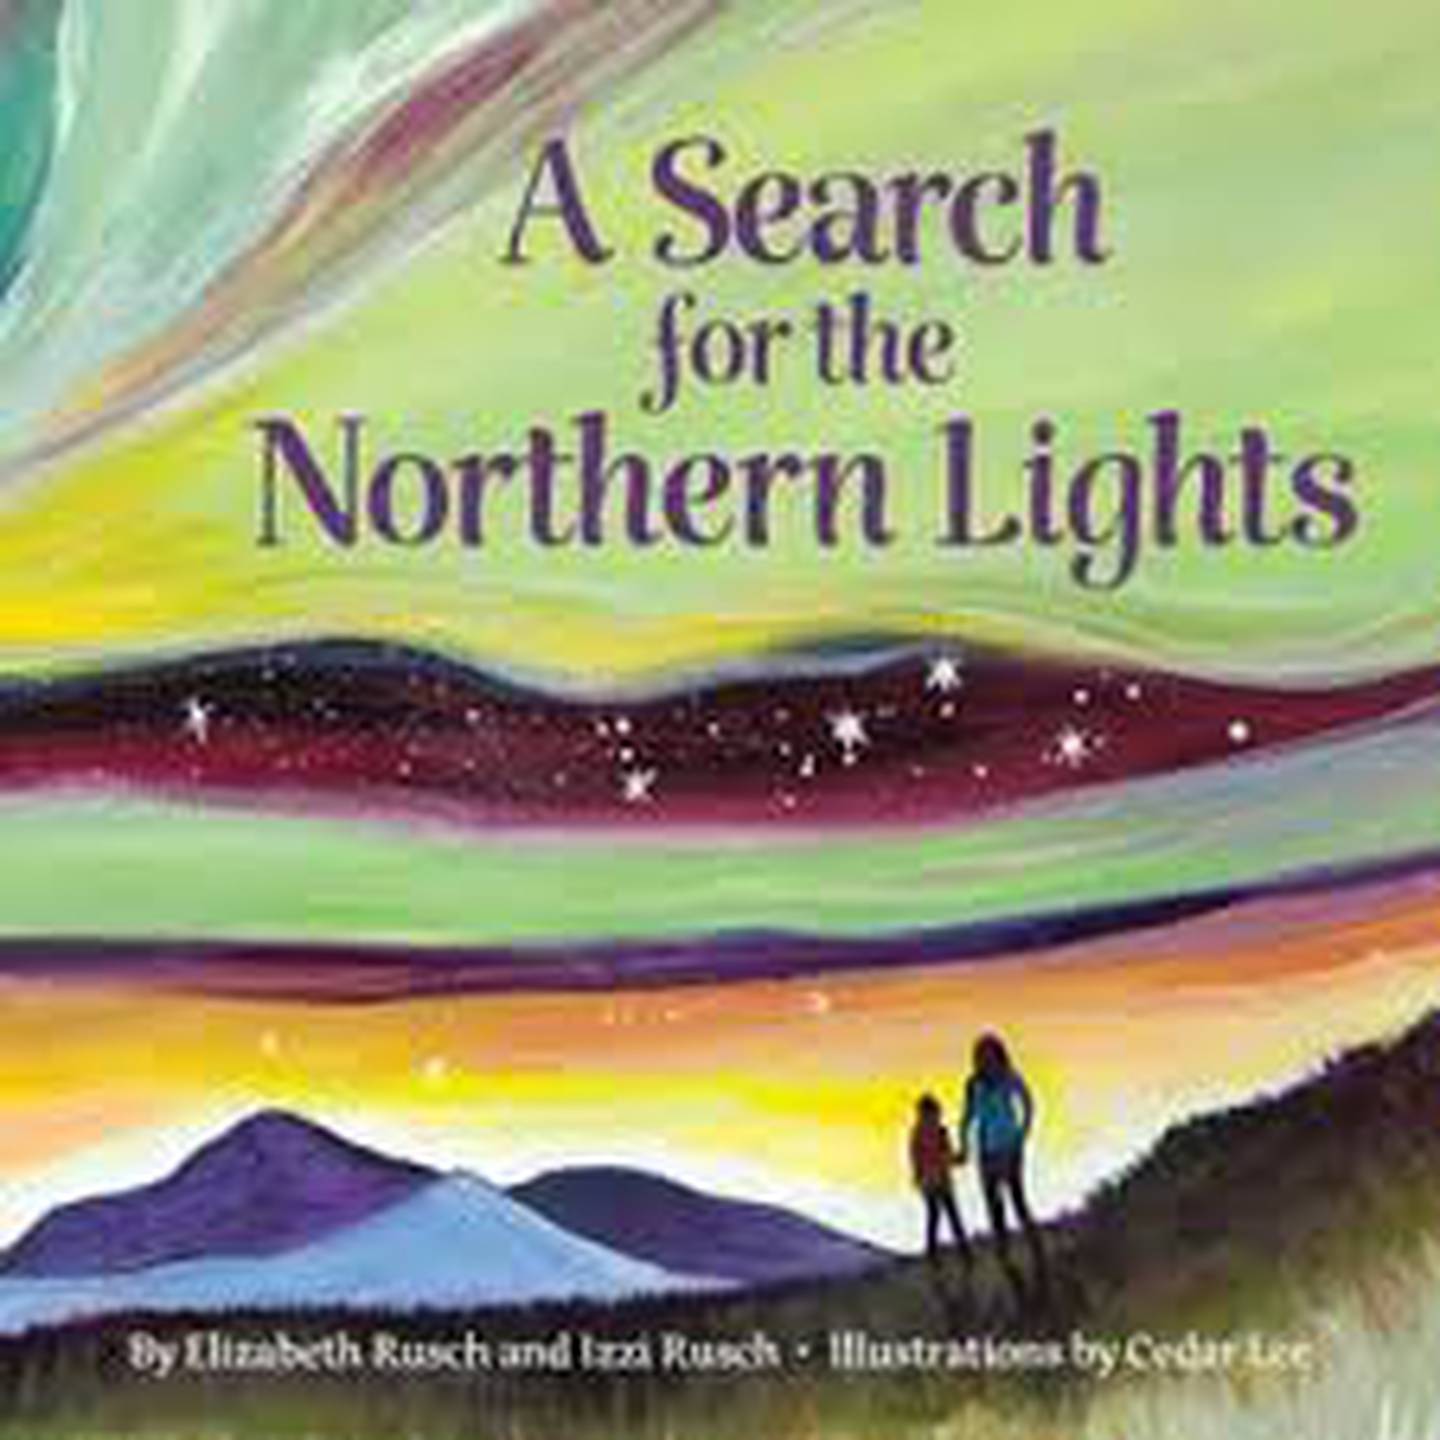 A Search for the Northern Lights